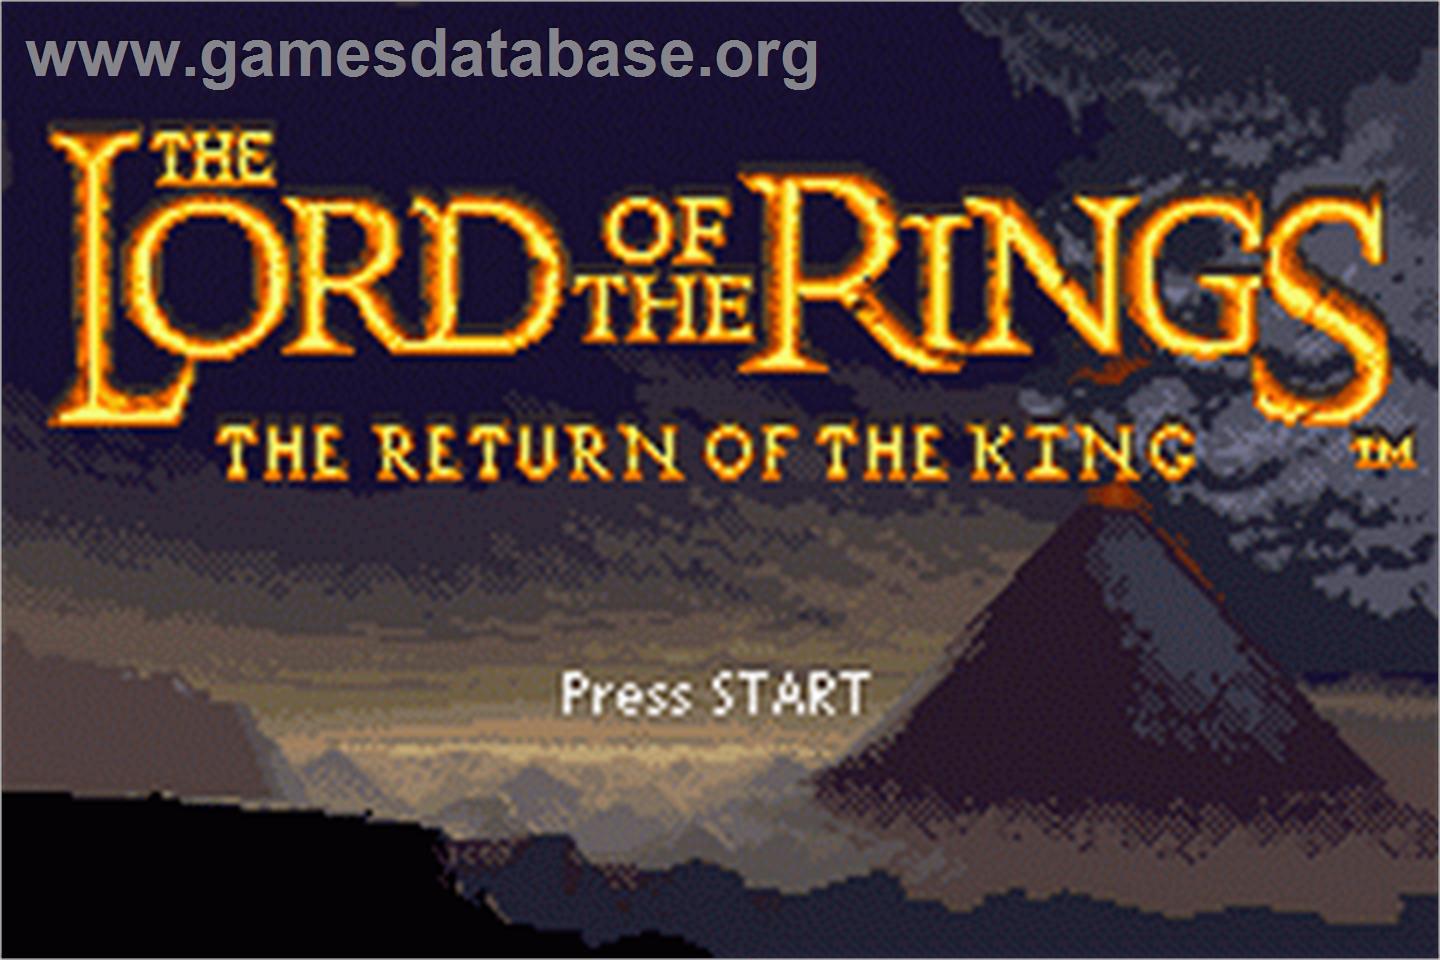 Lord of the Rings: The Return of the King - Nintendo Game Boy Advance - Artwork - Title Screen